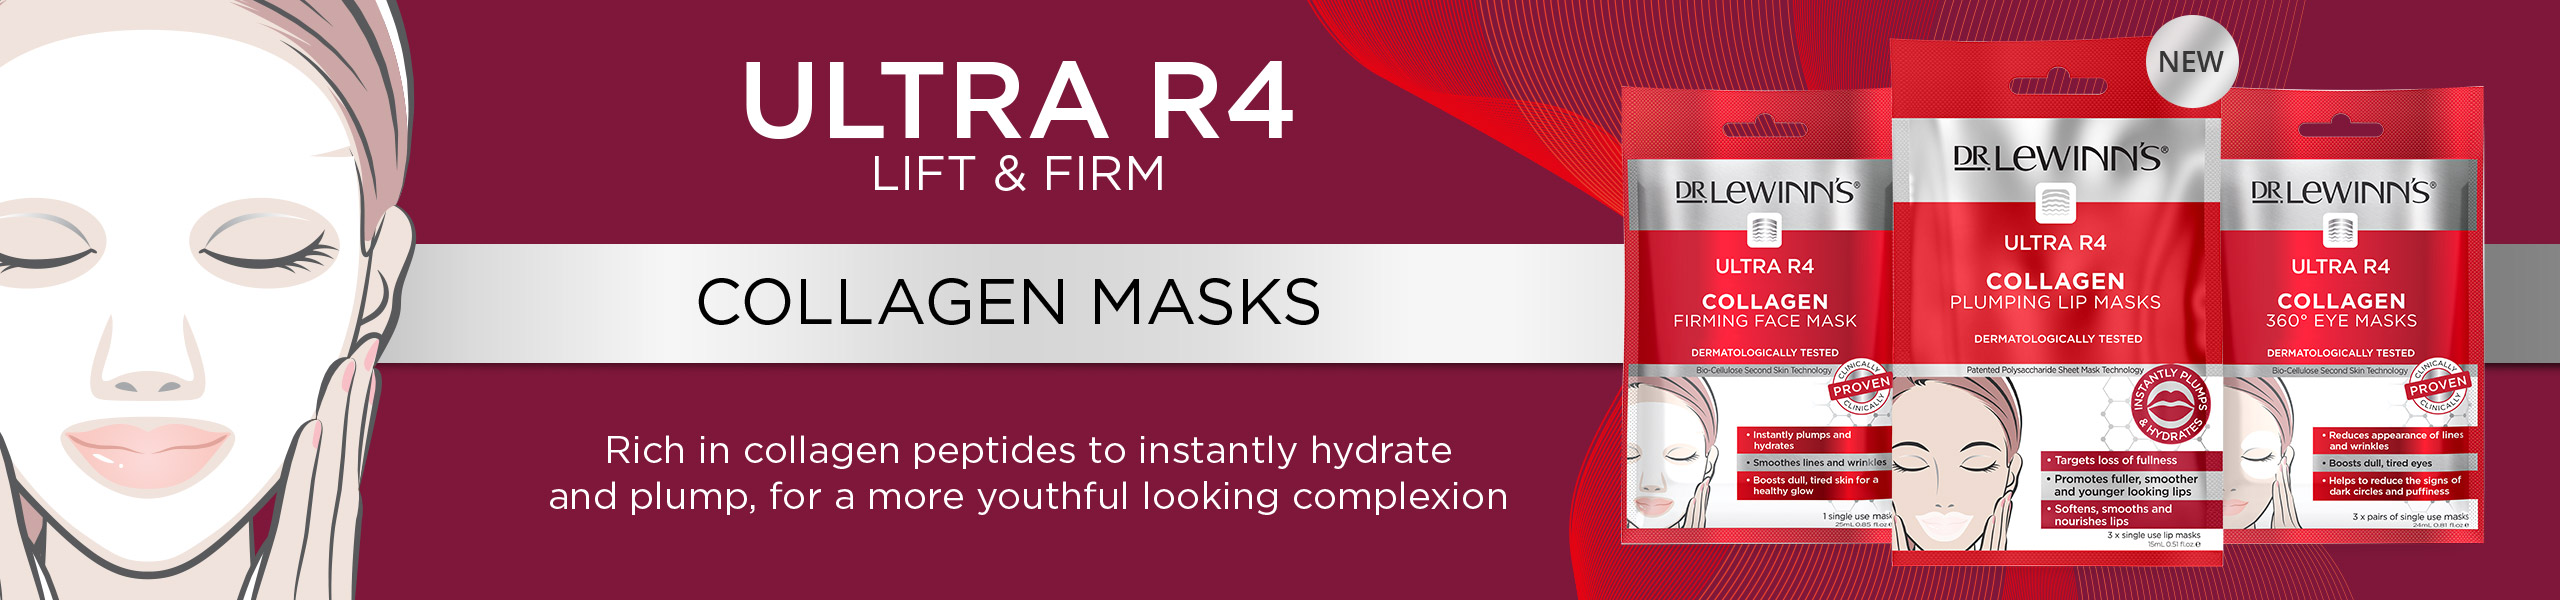 Ultra R4 Collagen Masks - Rich in collagen peptides to instantly hydrate and plump, for a more youthful looking complexion.